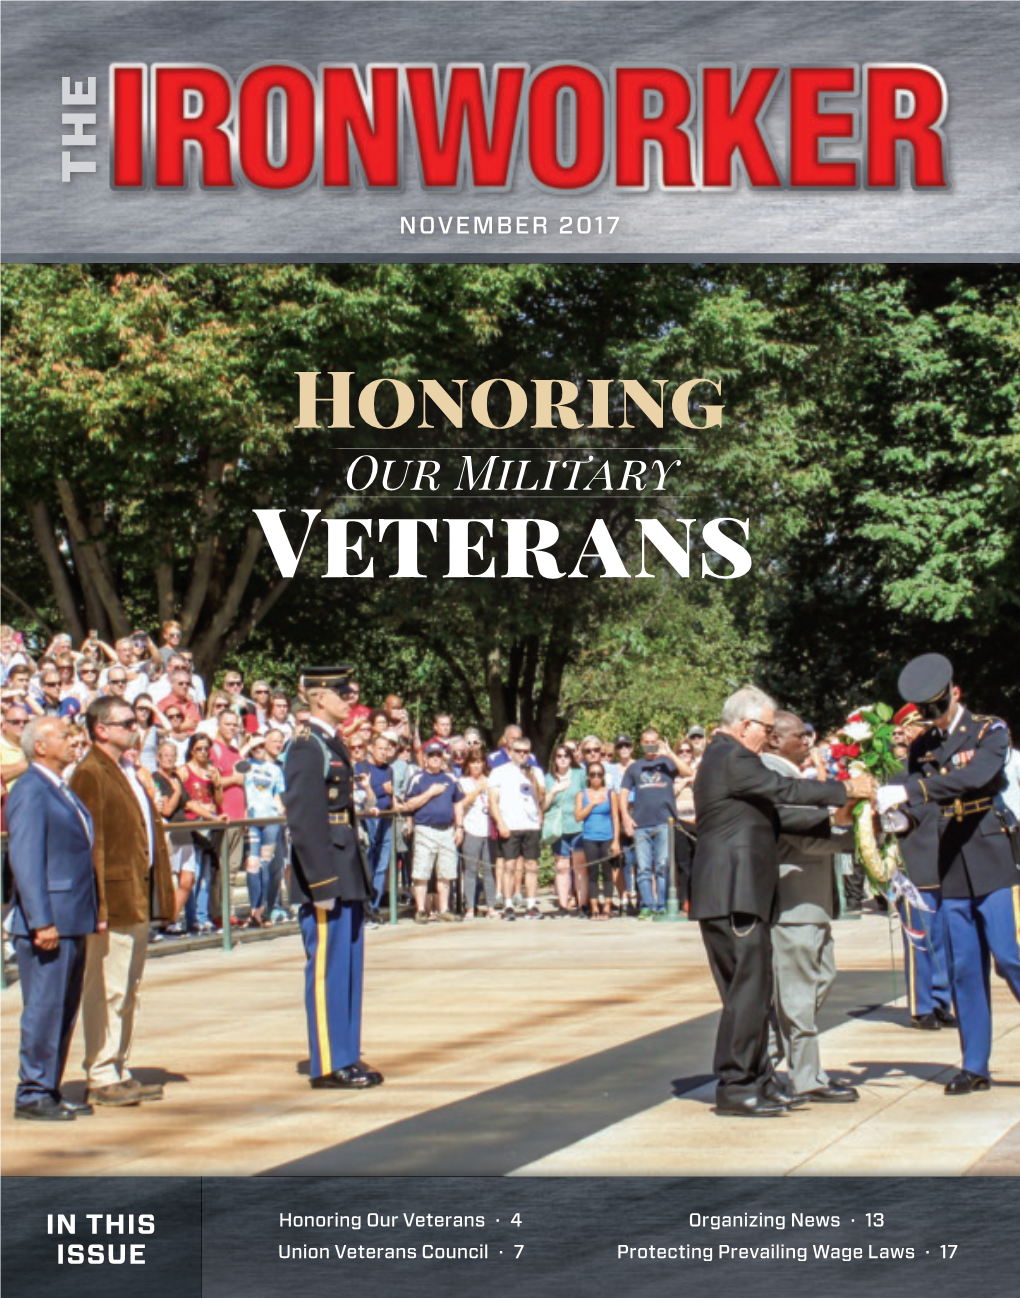 Veterans Council · 7 Union Veterans Veterans · 4 Our Honoring Honoring Our NOVEMBER 2017 Military Wage Laws · 17 Prevailing Protecting News · 13 Organizing